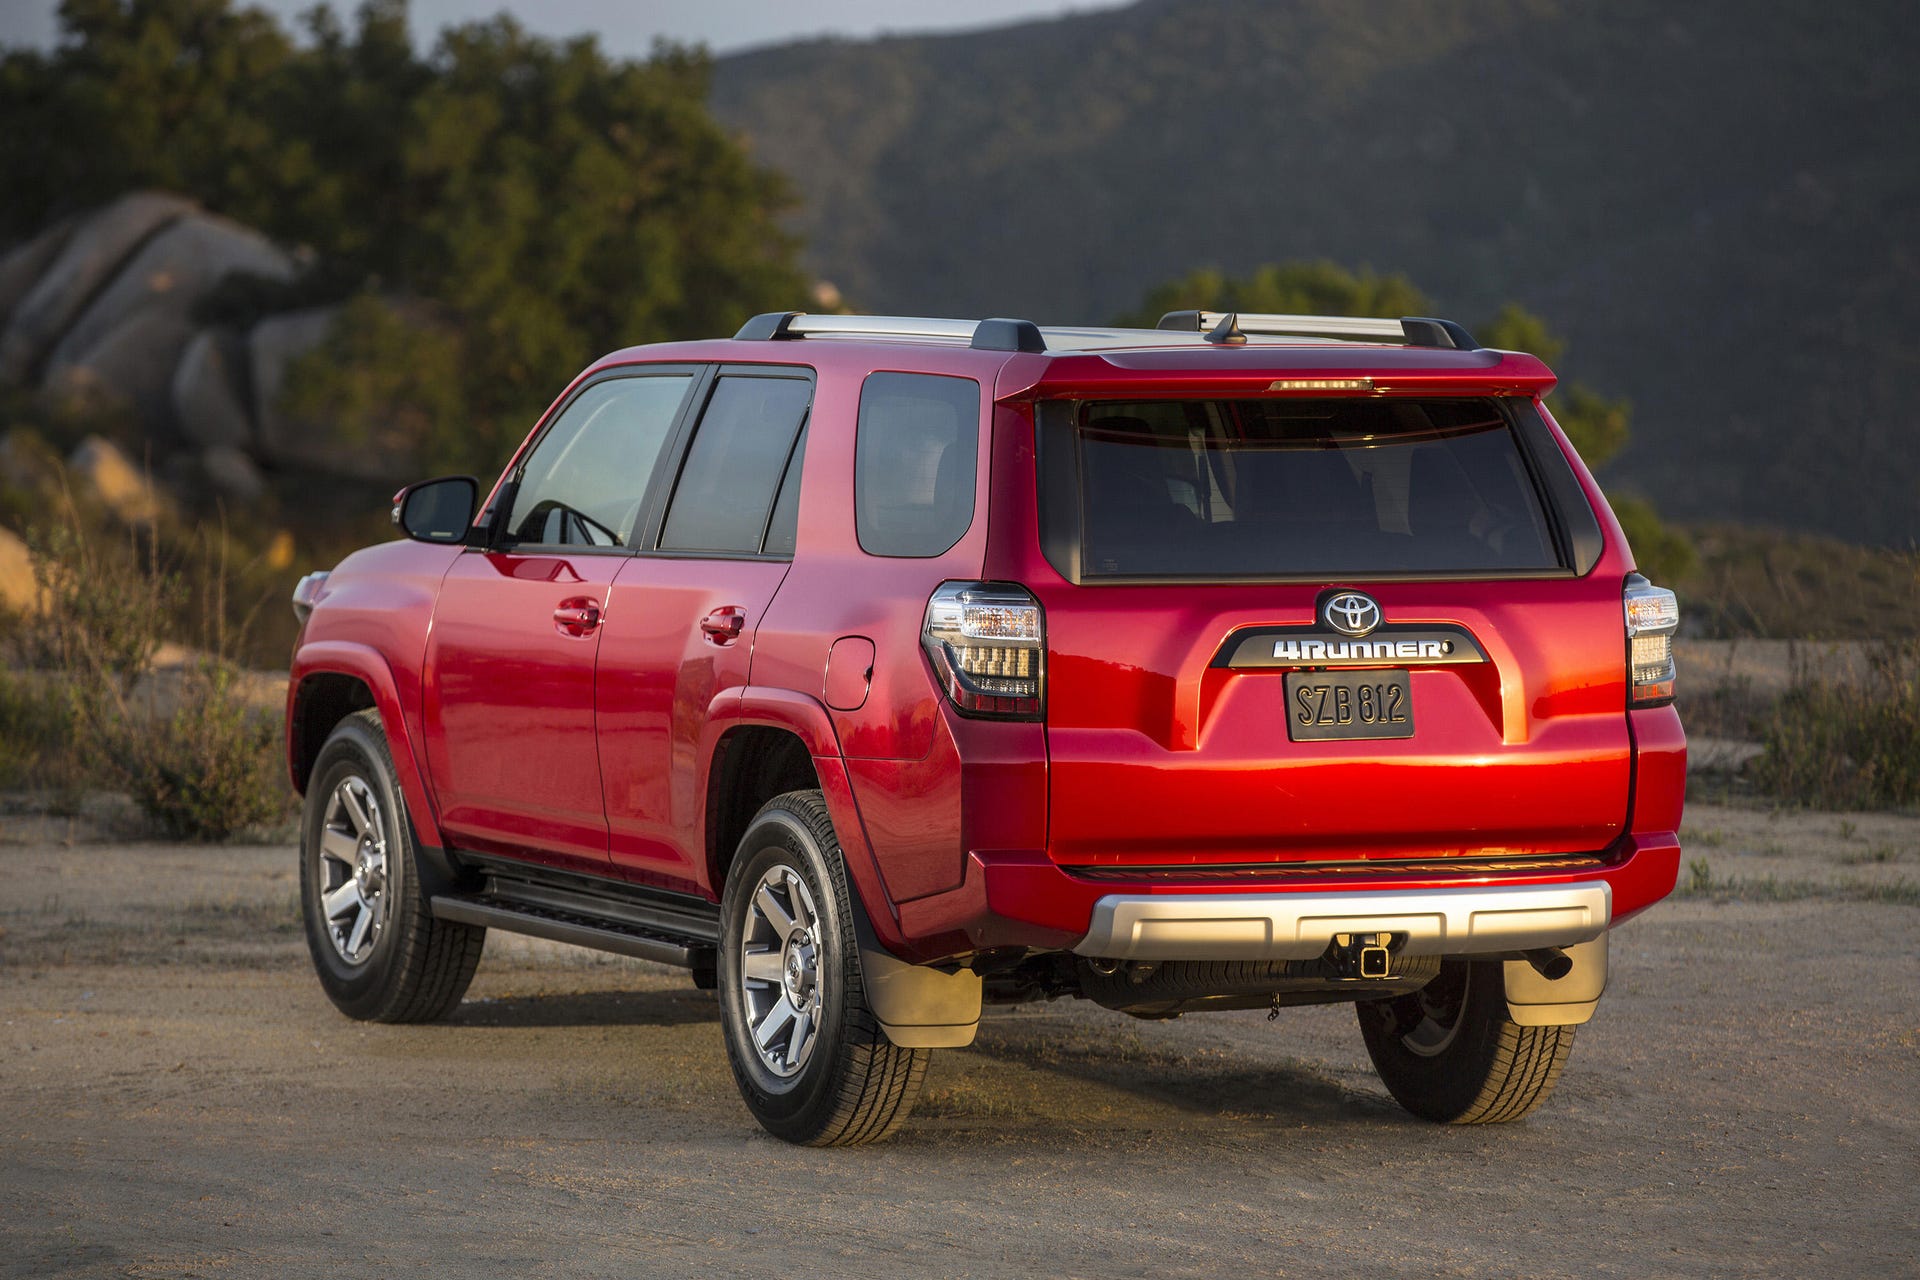 2019 Toyota 4Runner: Model overview, pricing, tech and specs - CNET